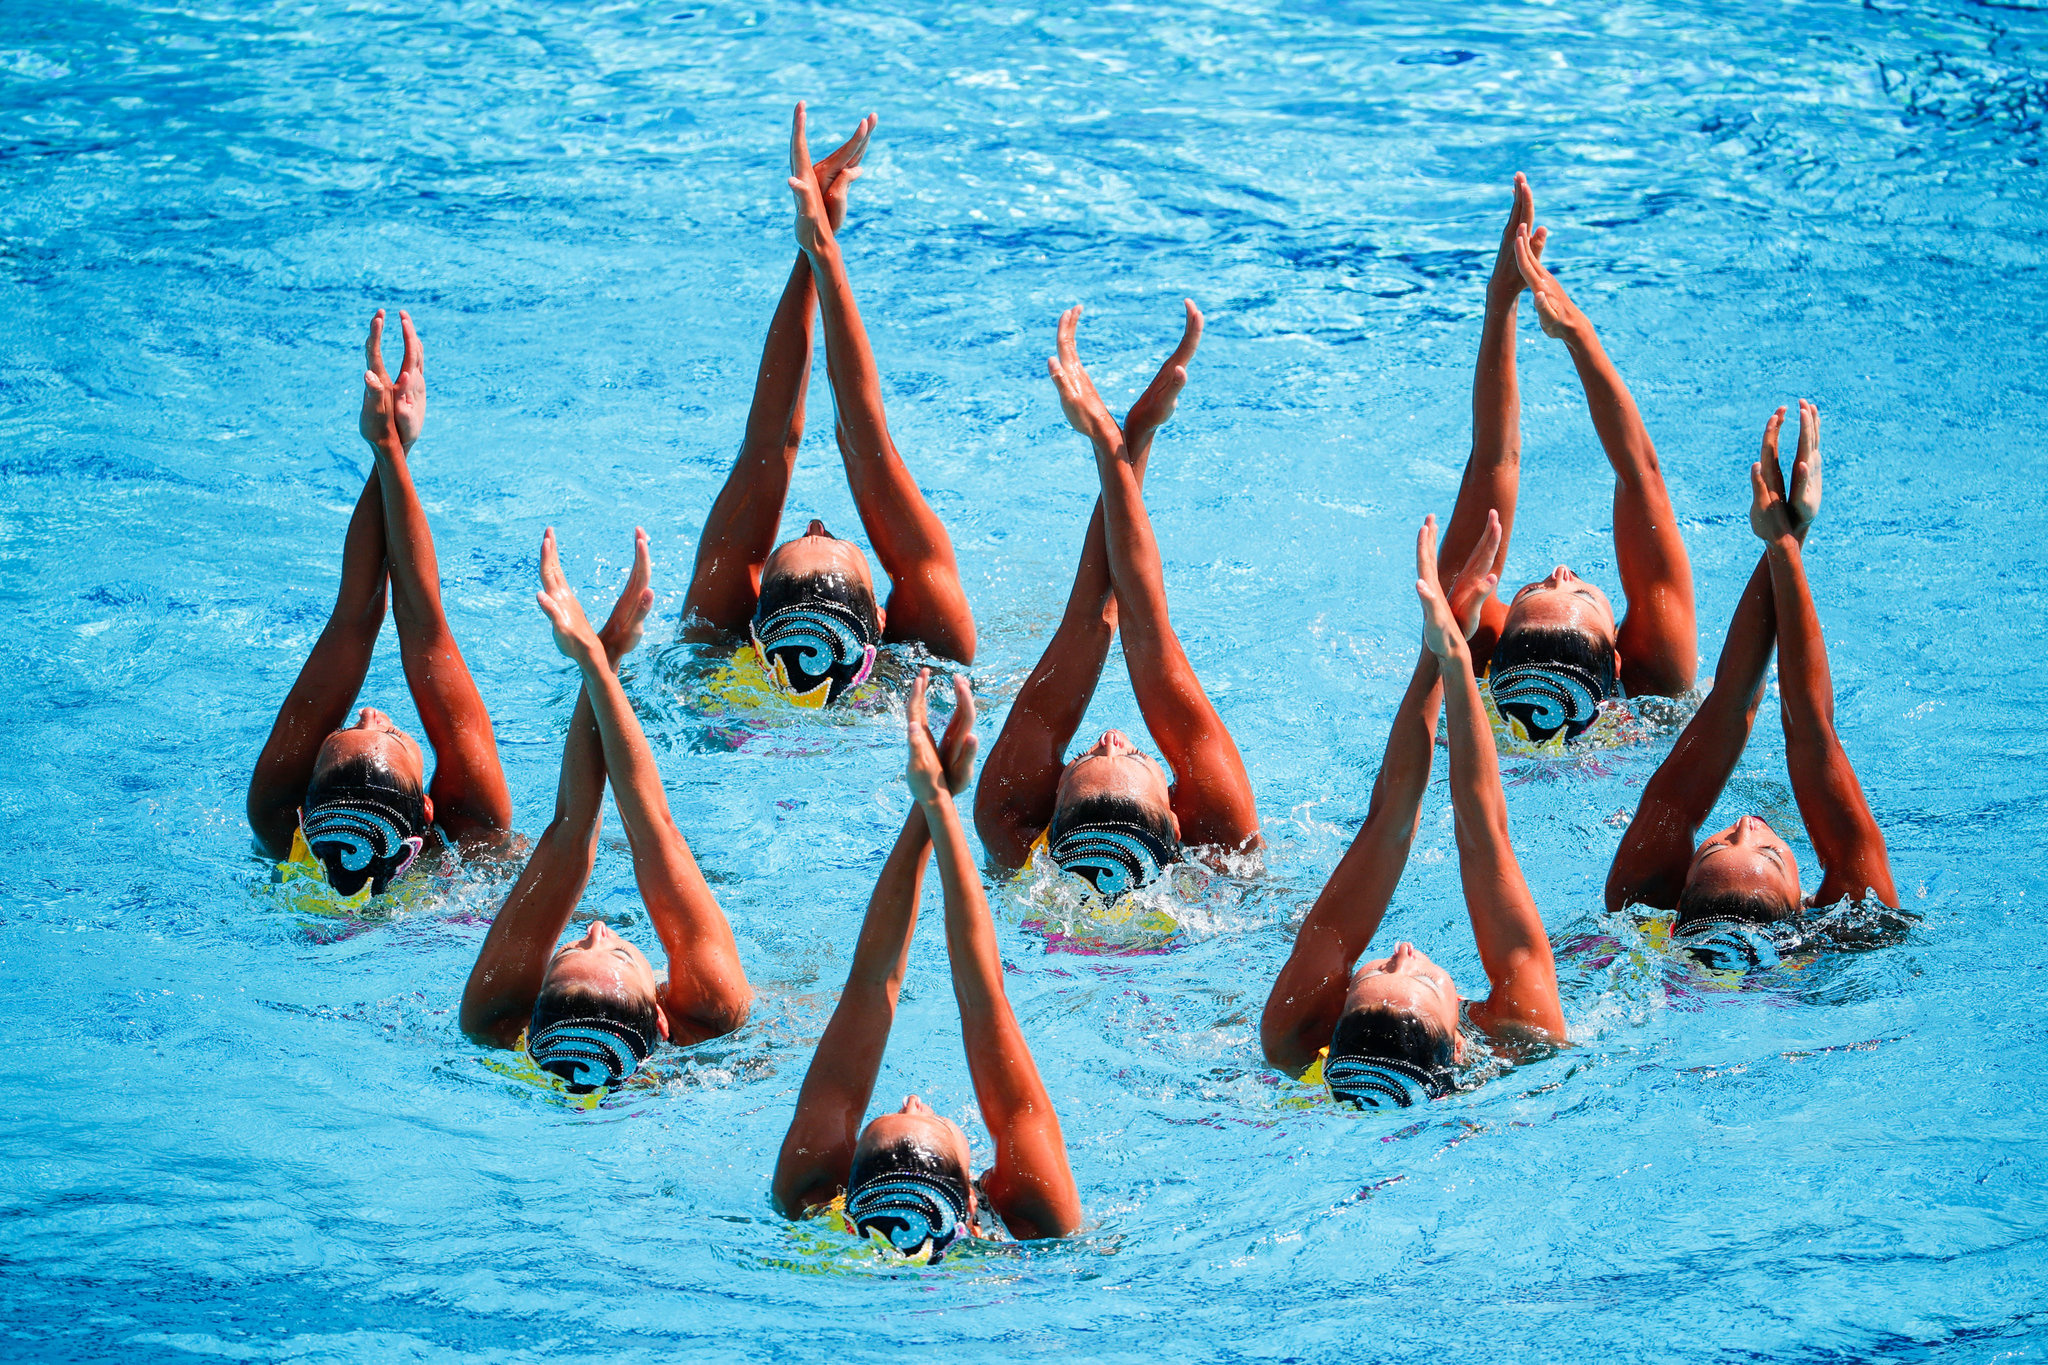 Synchronized Swimming: The water ballet, An artistic water sports discipline. 2050x1370 HD Wallpaper.